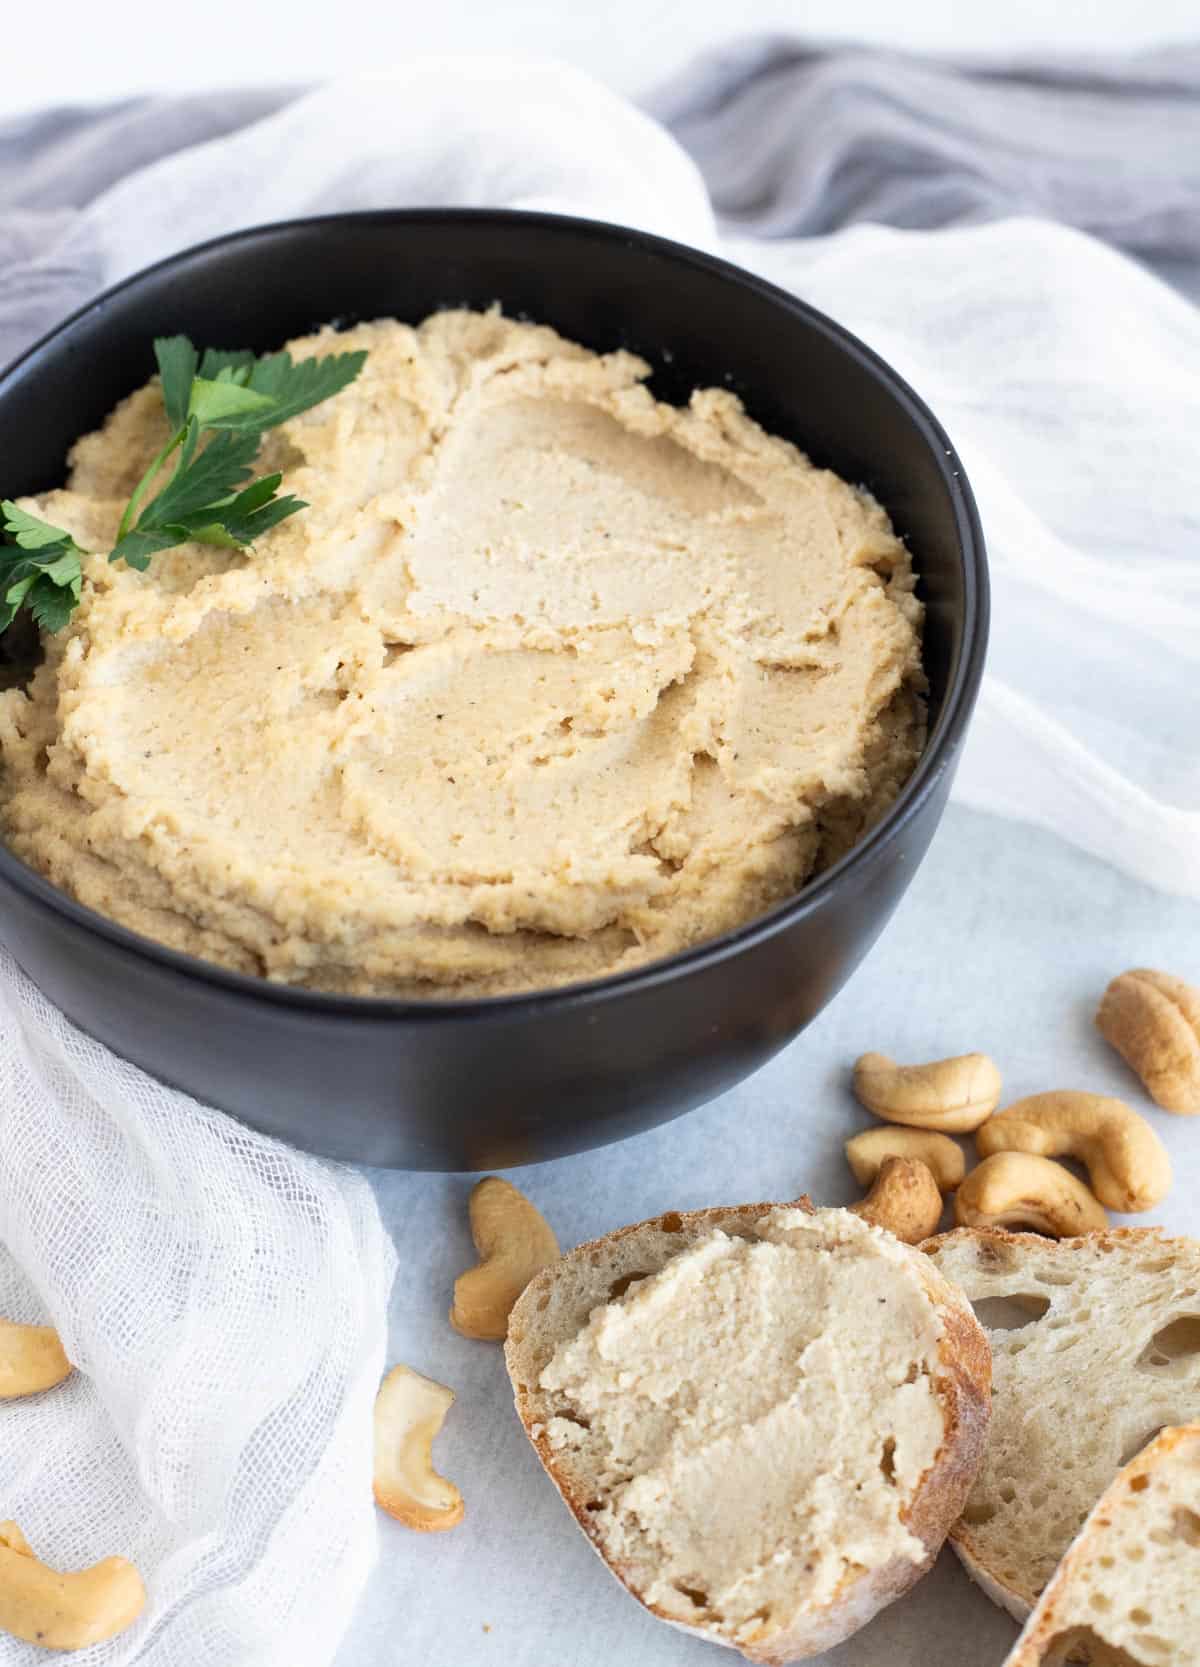 Cashew cheese in black bowl, served beside sliced bread.